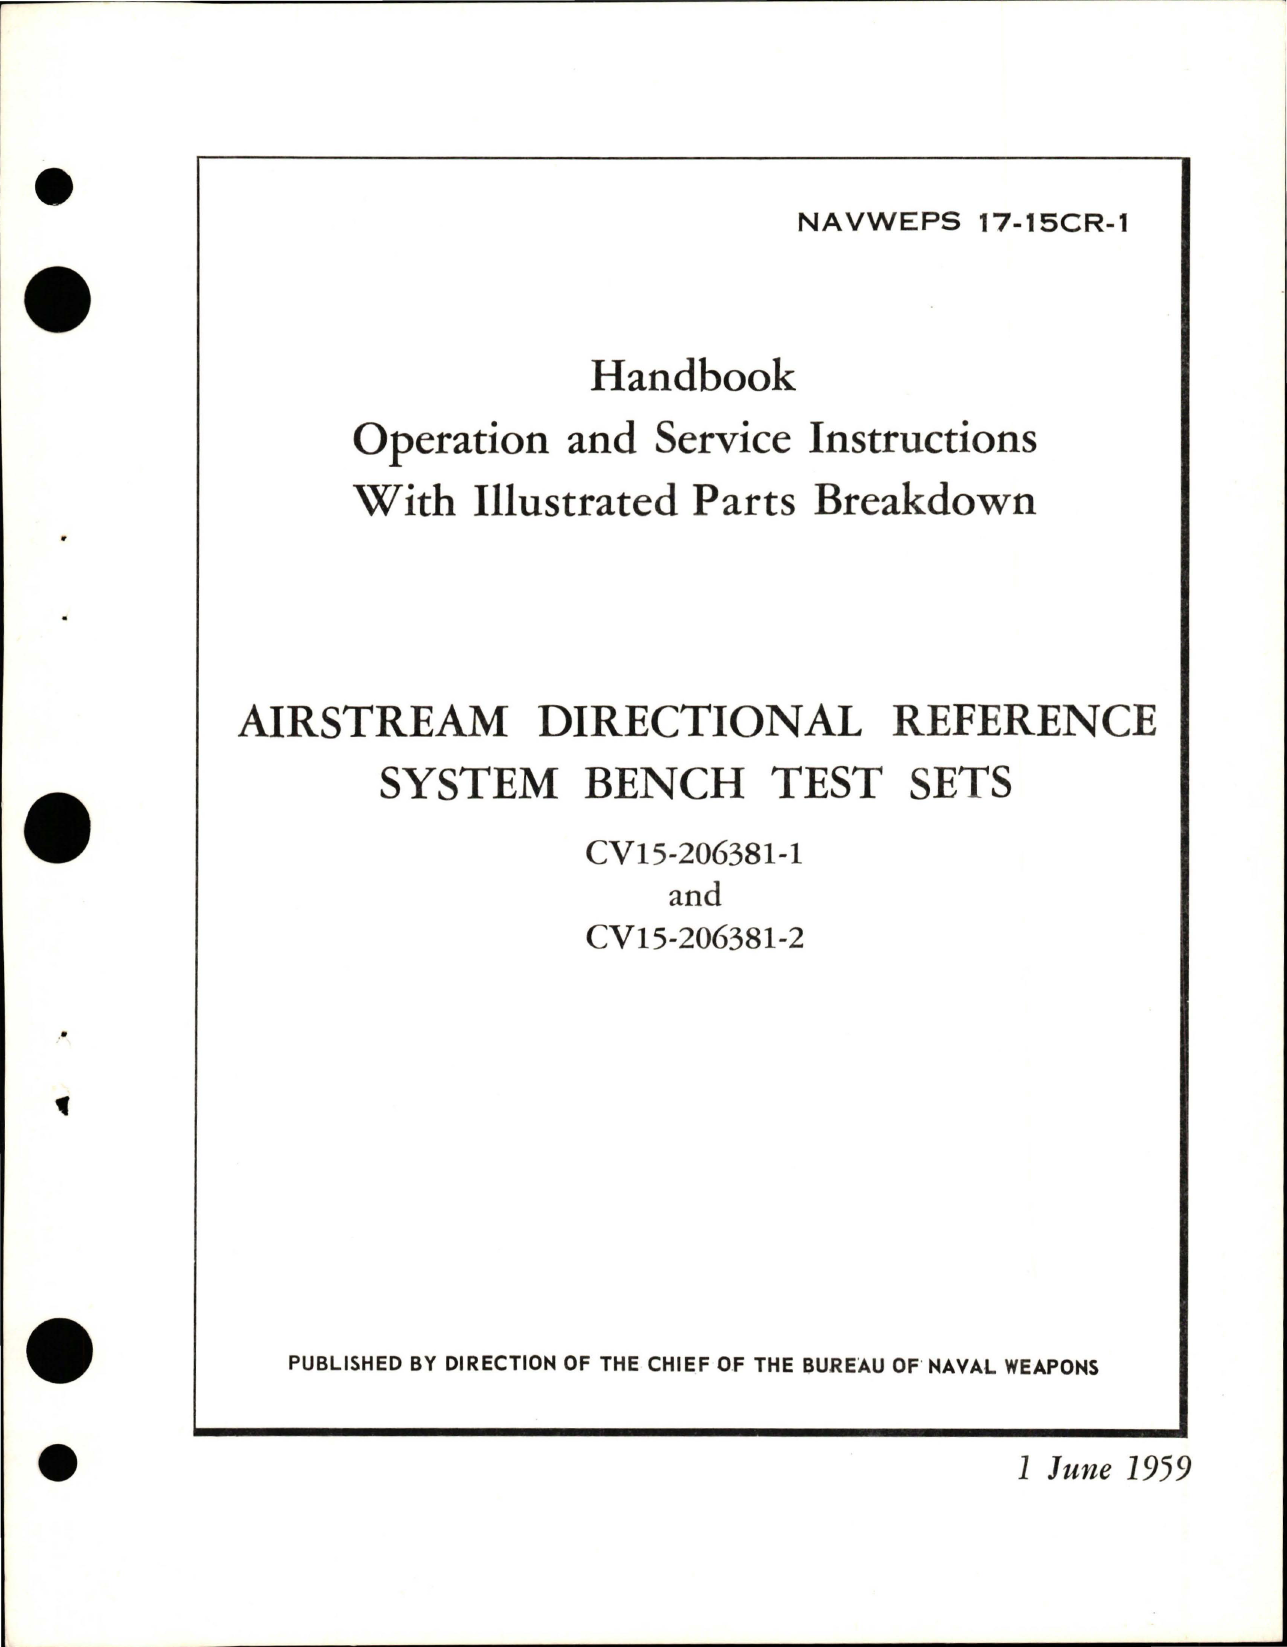 Sample page 1 from AirCorps Library document: Operation and Service Instructions with Illustrated Parts for Airstream Directional Reference System Bench Test Sets - CV15-206381-1 and CV15-206381-2 